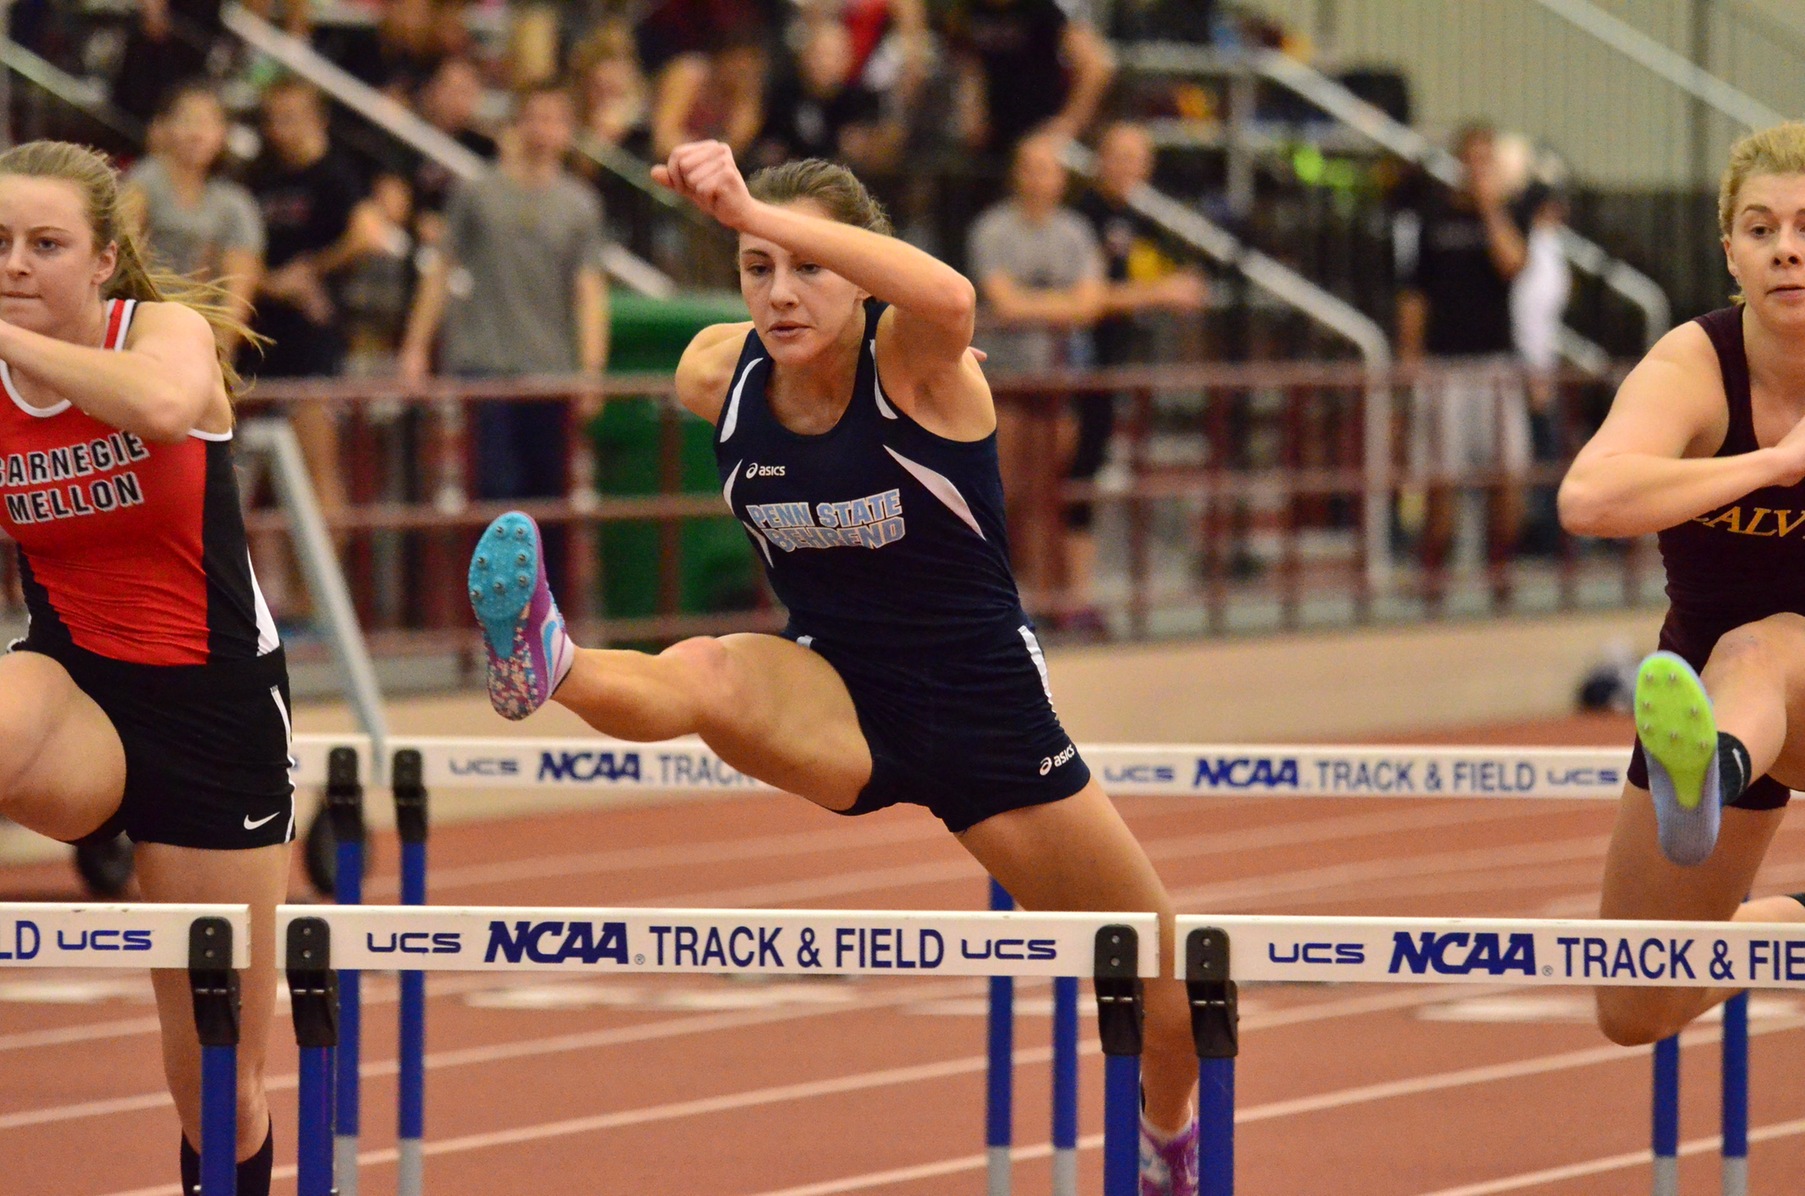 Women's Tack & Field Compete at SPIRE